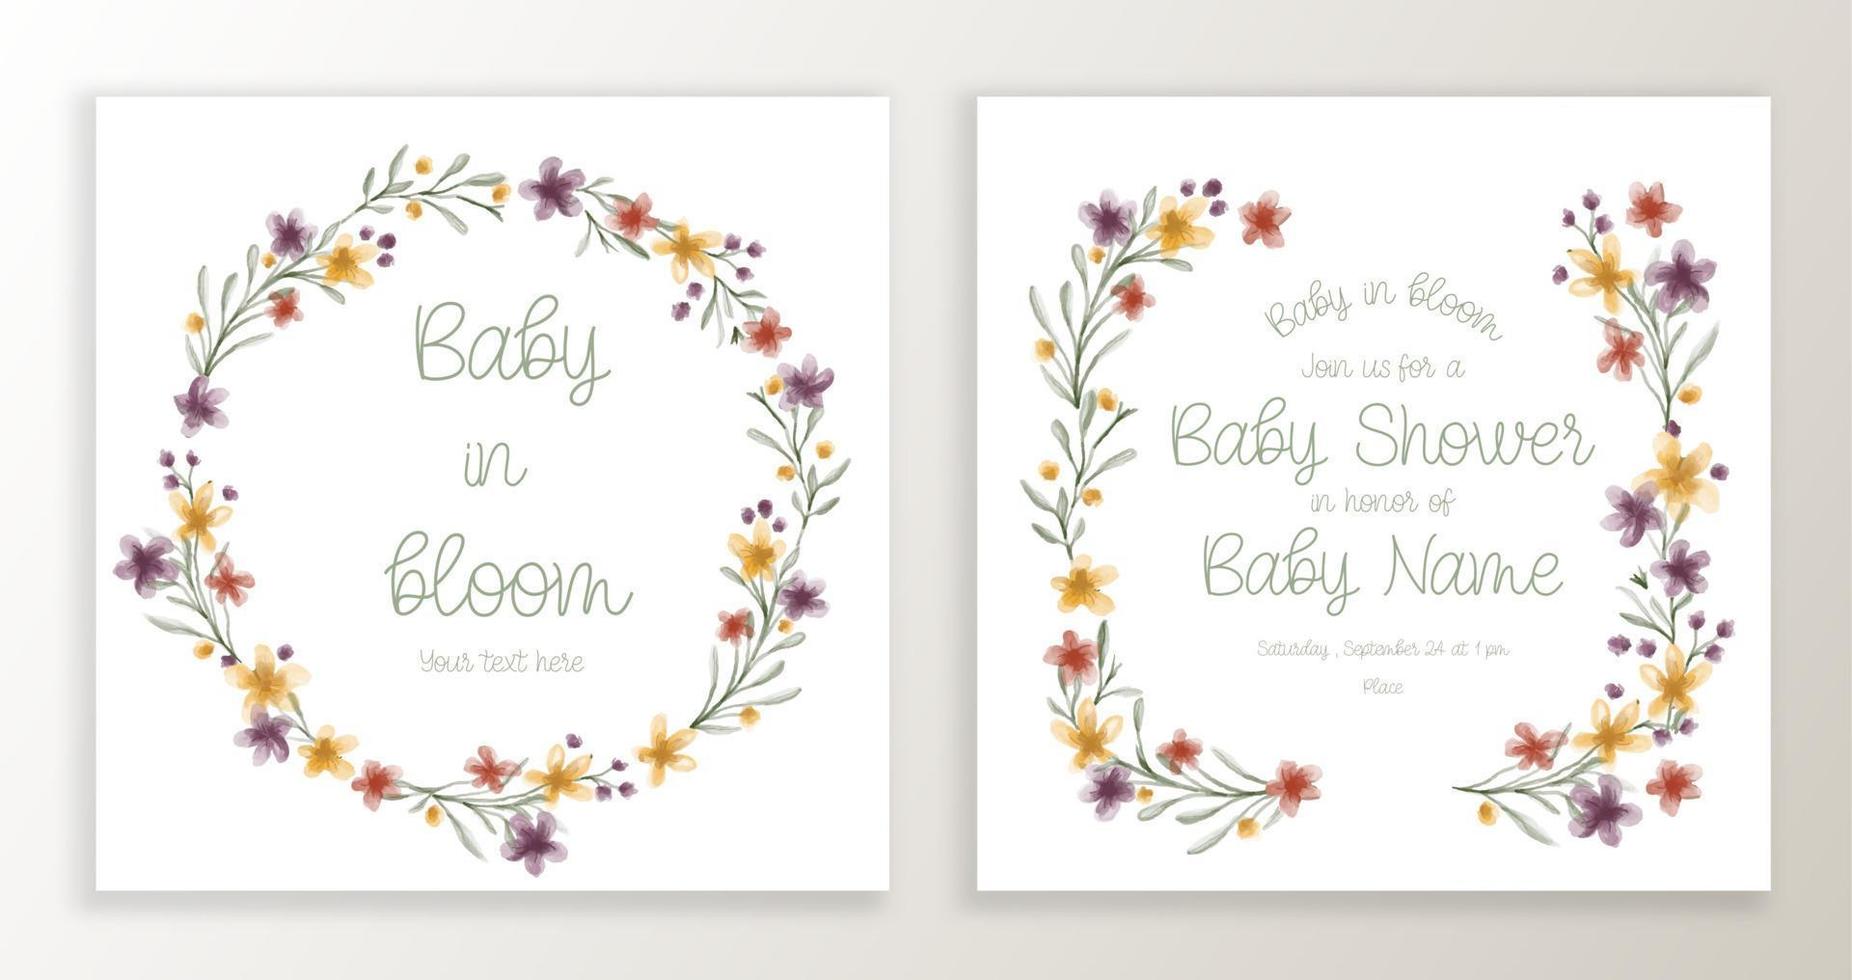 Baby Shower invitation template with watercolor floral and typographic design elements. vector